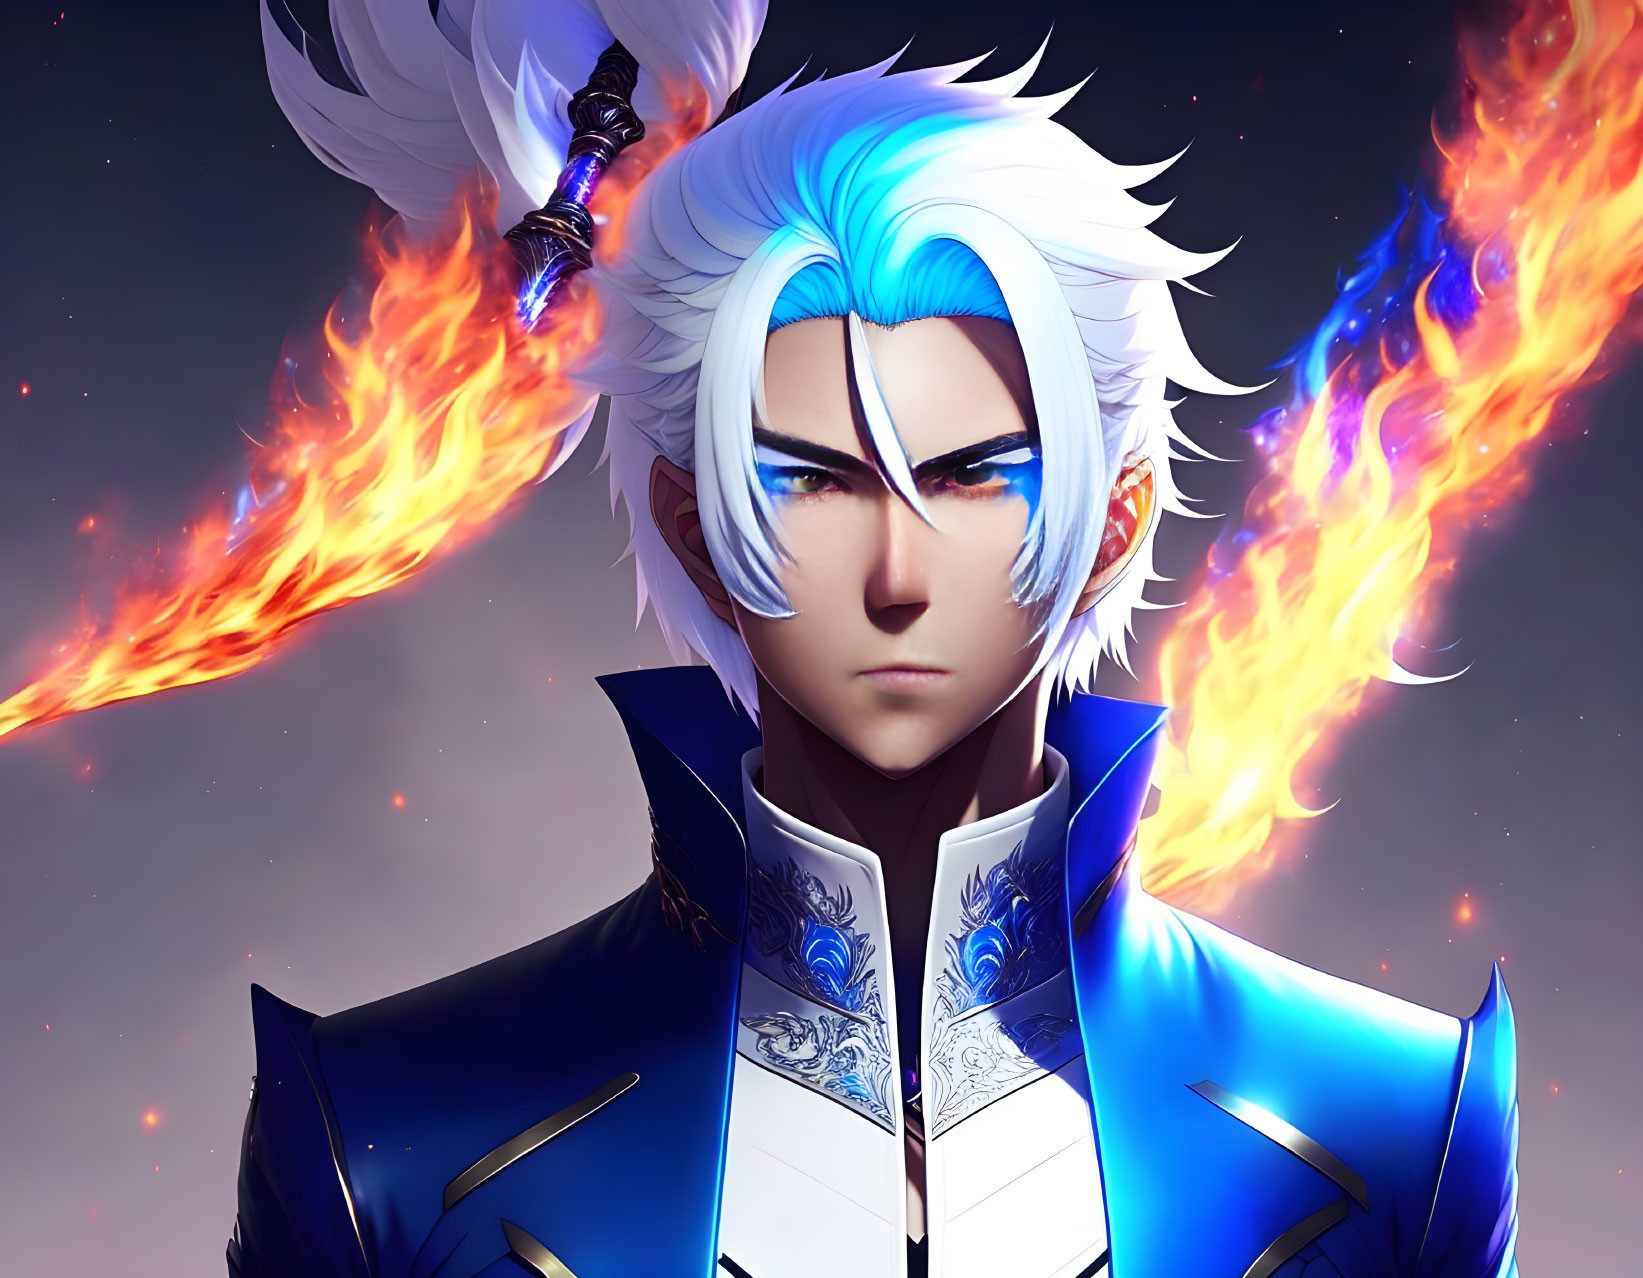 Fiery Blue-Eyed Animated Character with White & Blue Hair